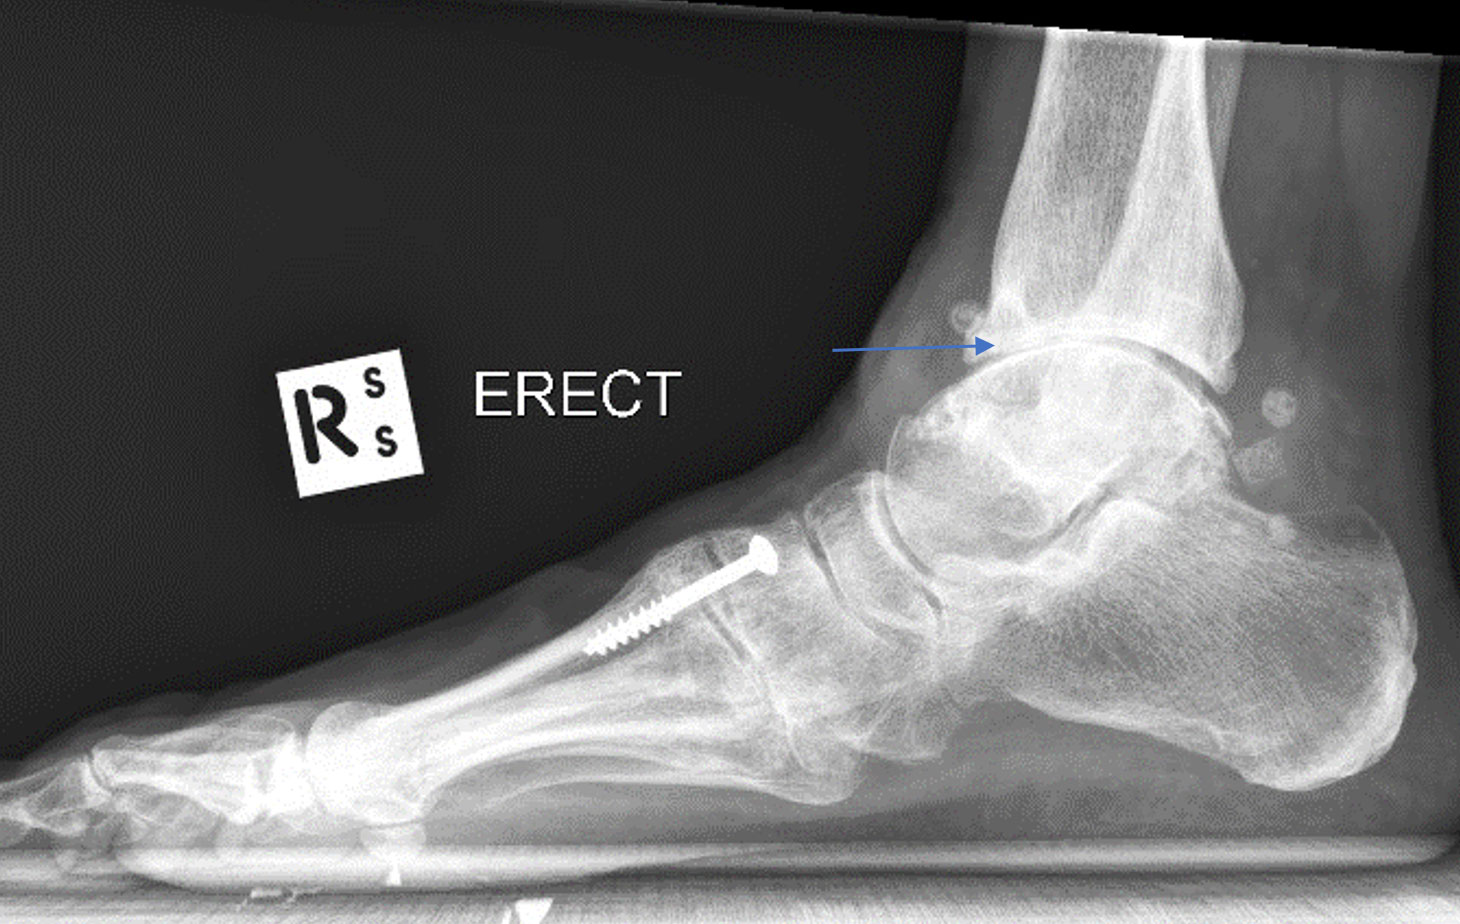 Ankle osteoarthritis may require ankle fusion surgery